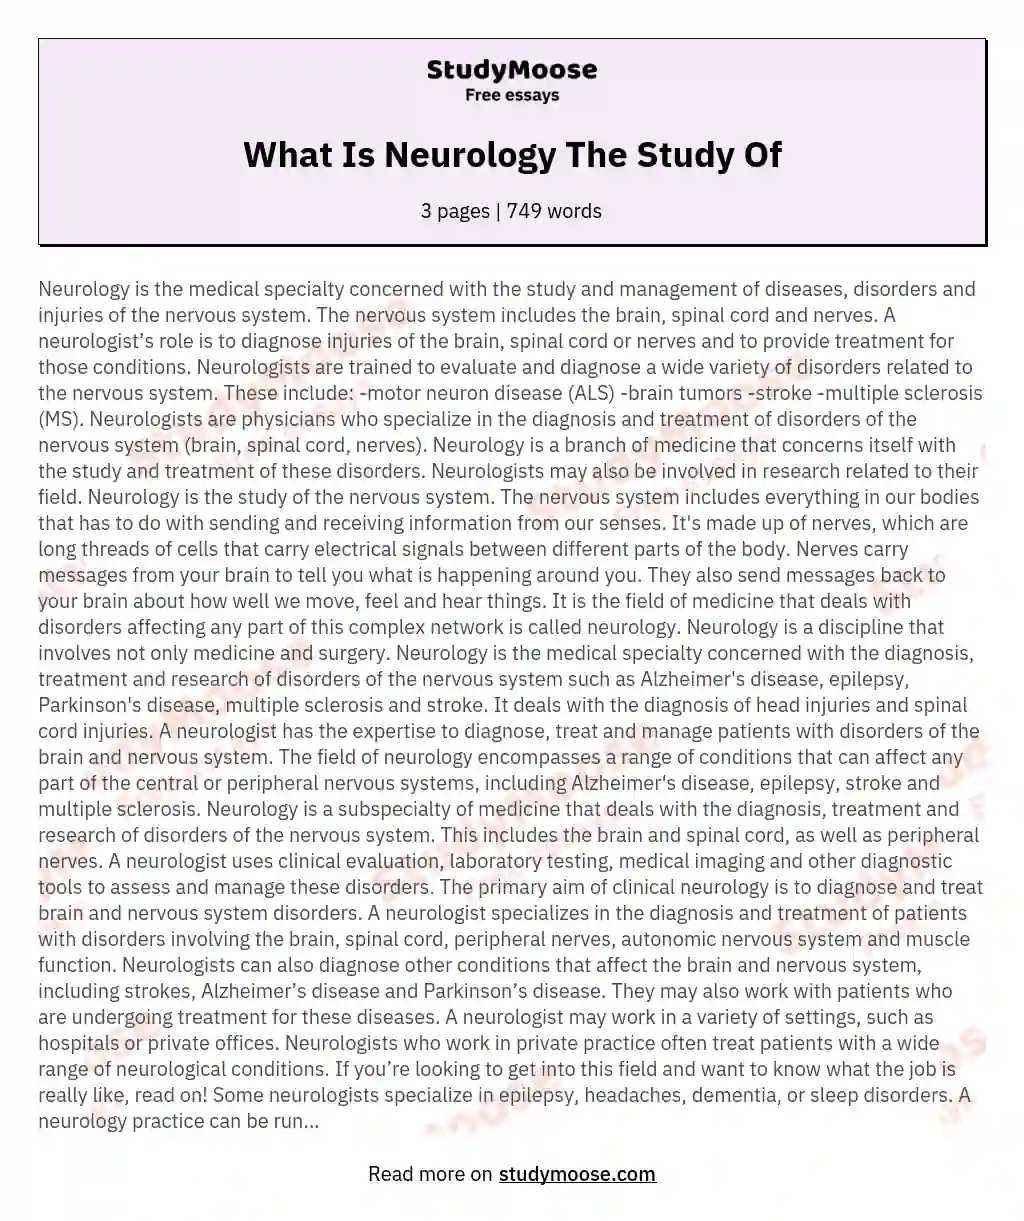 What Is Neurology The Study Of essay